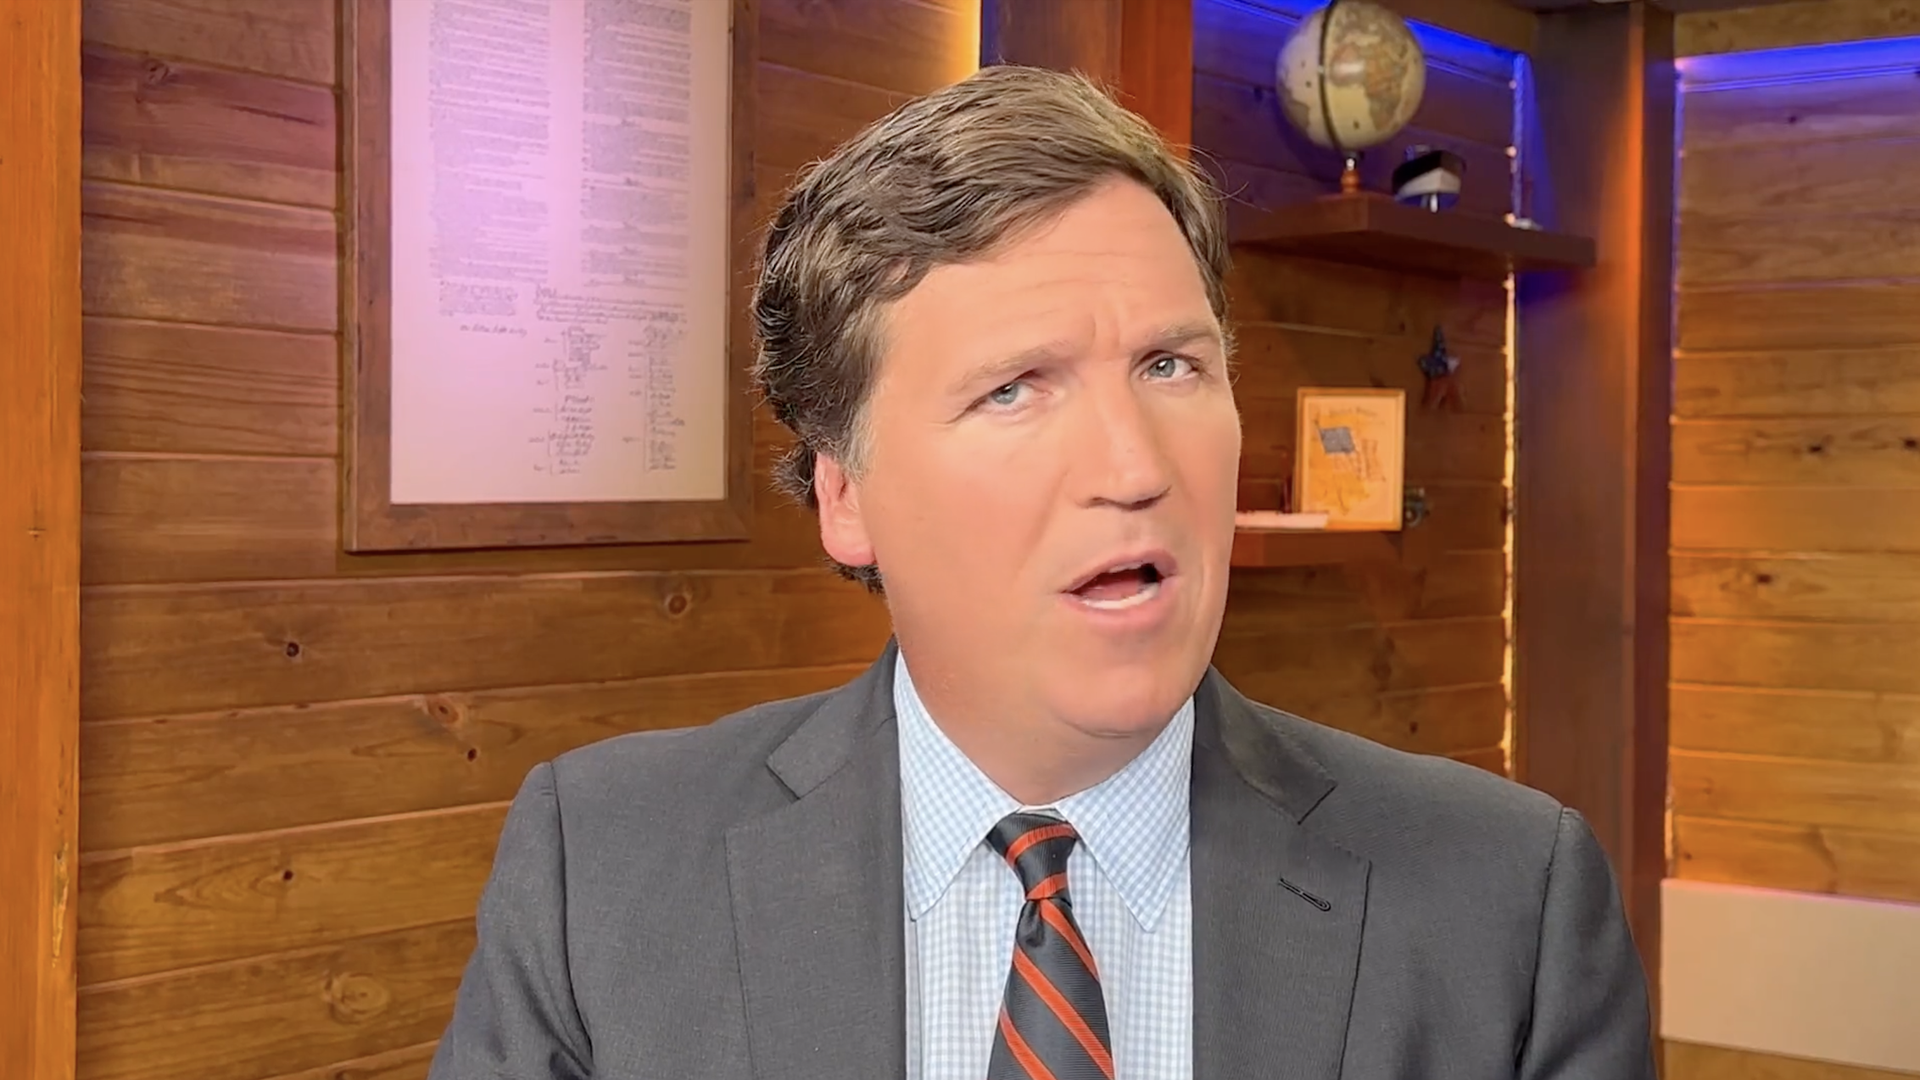 Tucker Carlson ‘preparing for war’ against Fox News in order to be released from contract early (independent.co.uk)